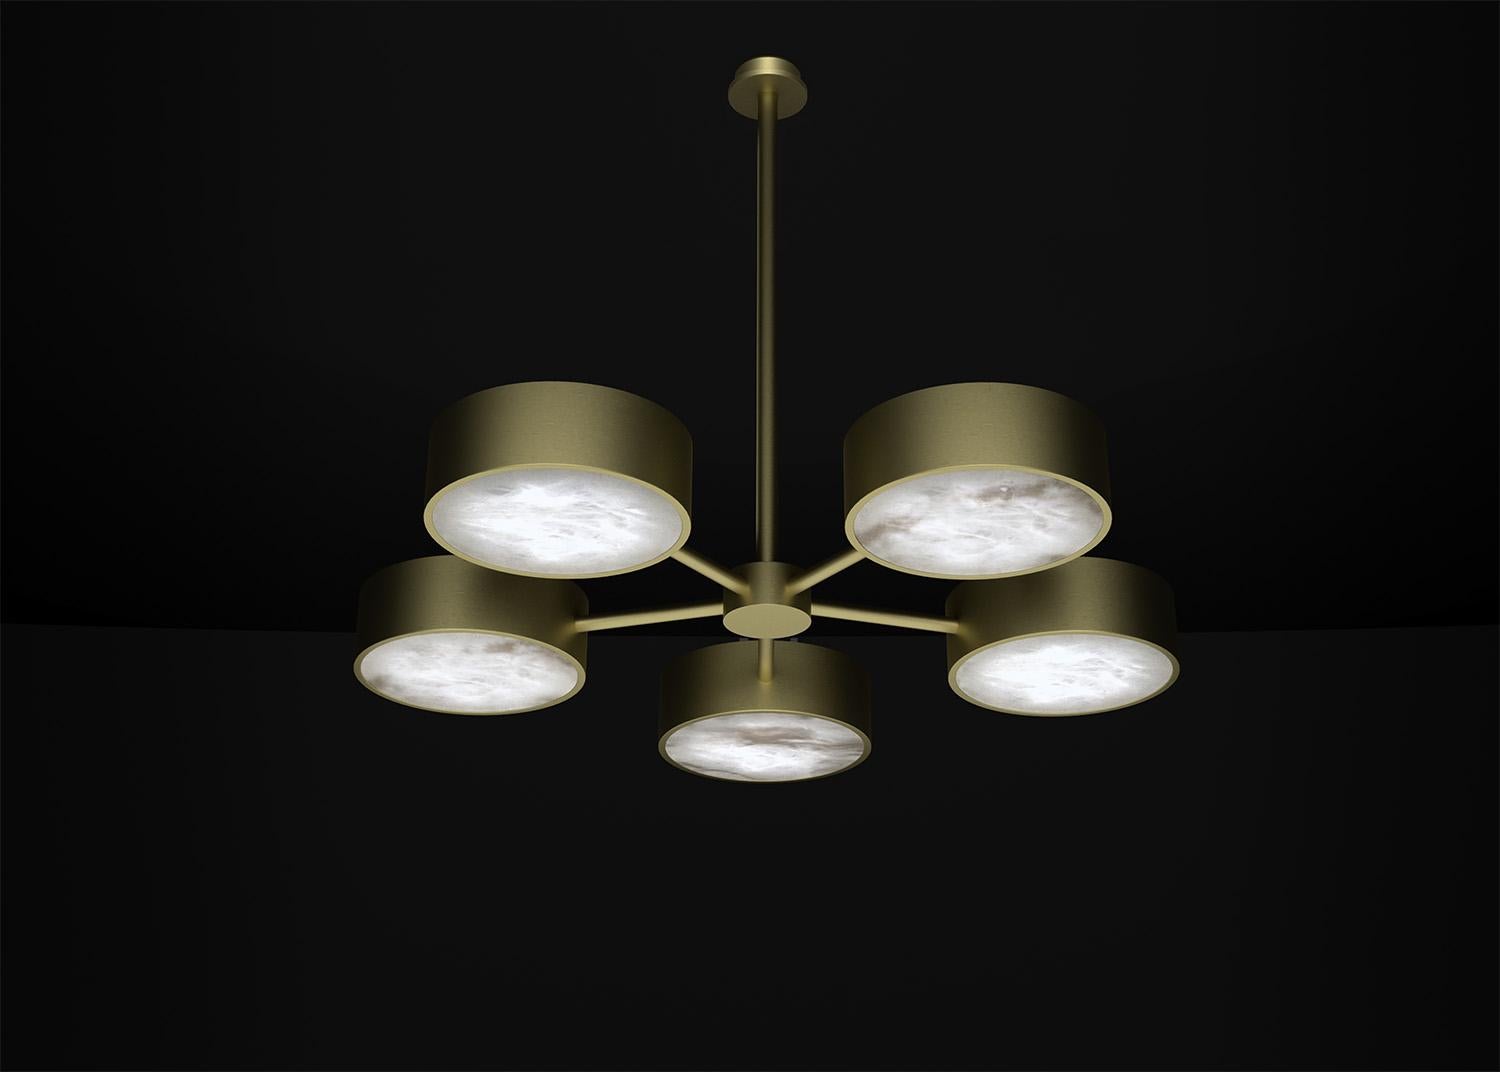 Chaos Brushed Brass Chandelier by Alabastro Italiano
Dimensions: D 97 x W 100 x H 84.5 cm.
Materials: White alabaster and brass.

Available in different finishes: Shiny Silver, Bronze, Brushed Brass, Ruggine of Florence, Brushed Burnished, Shiny